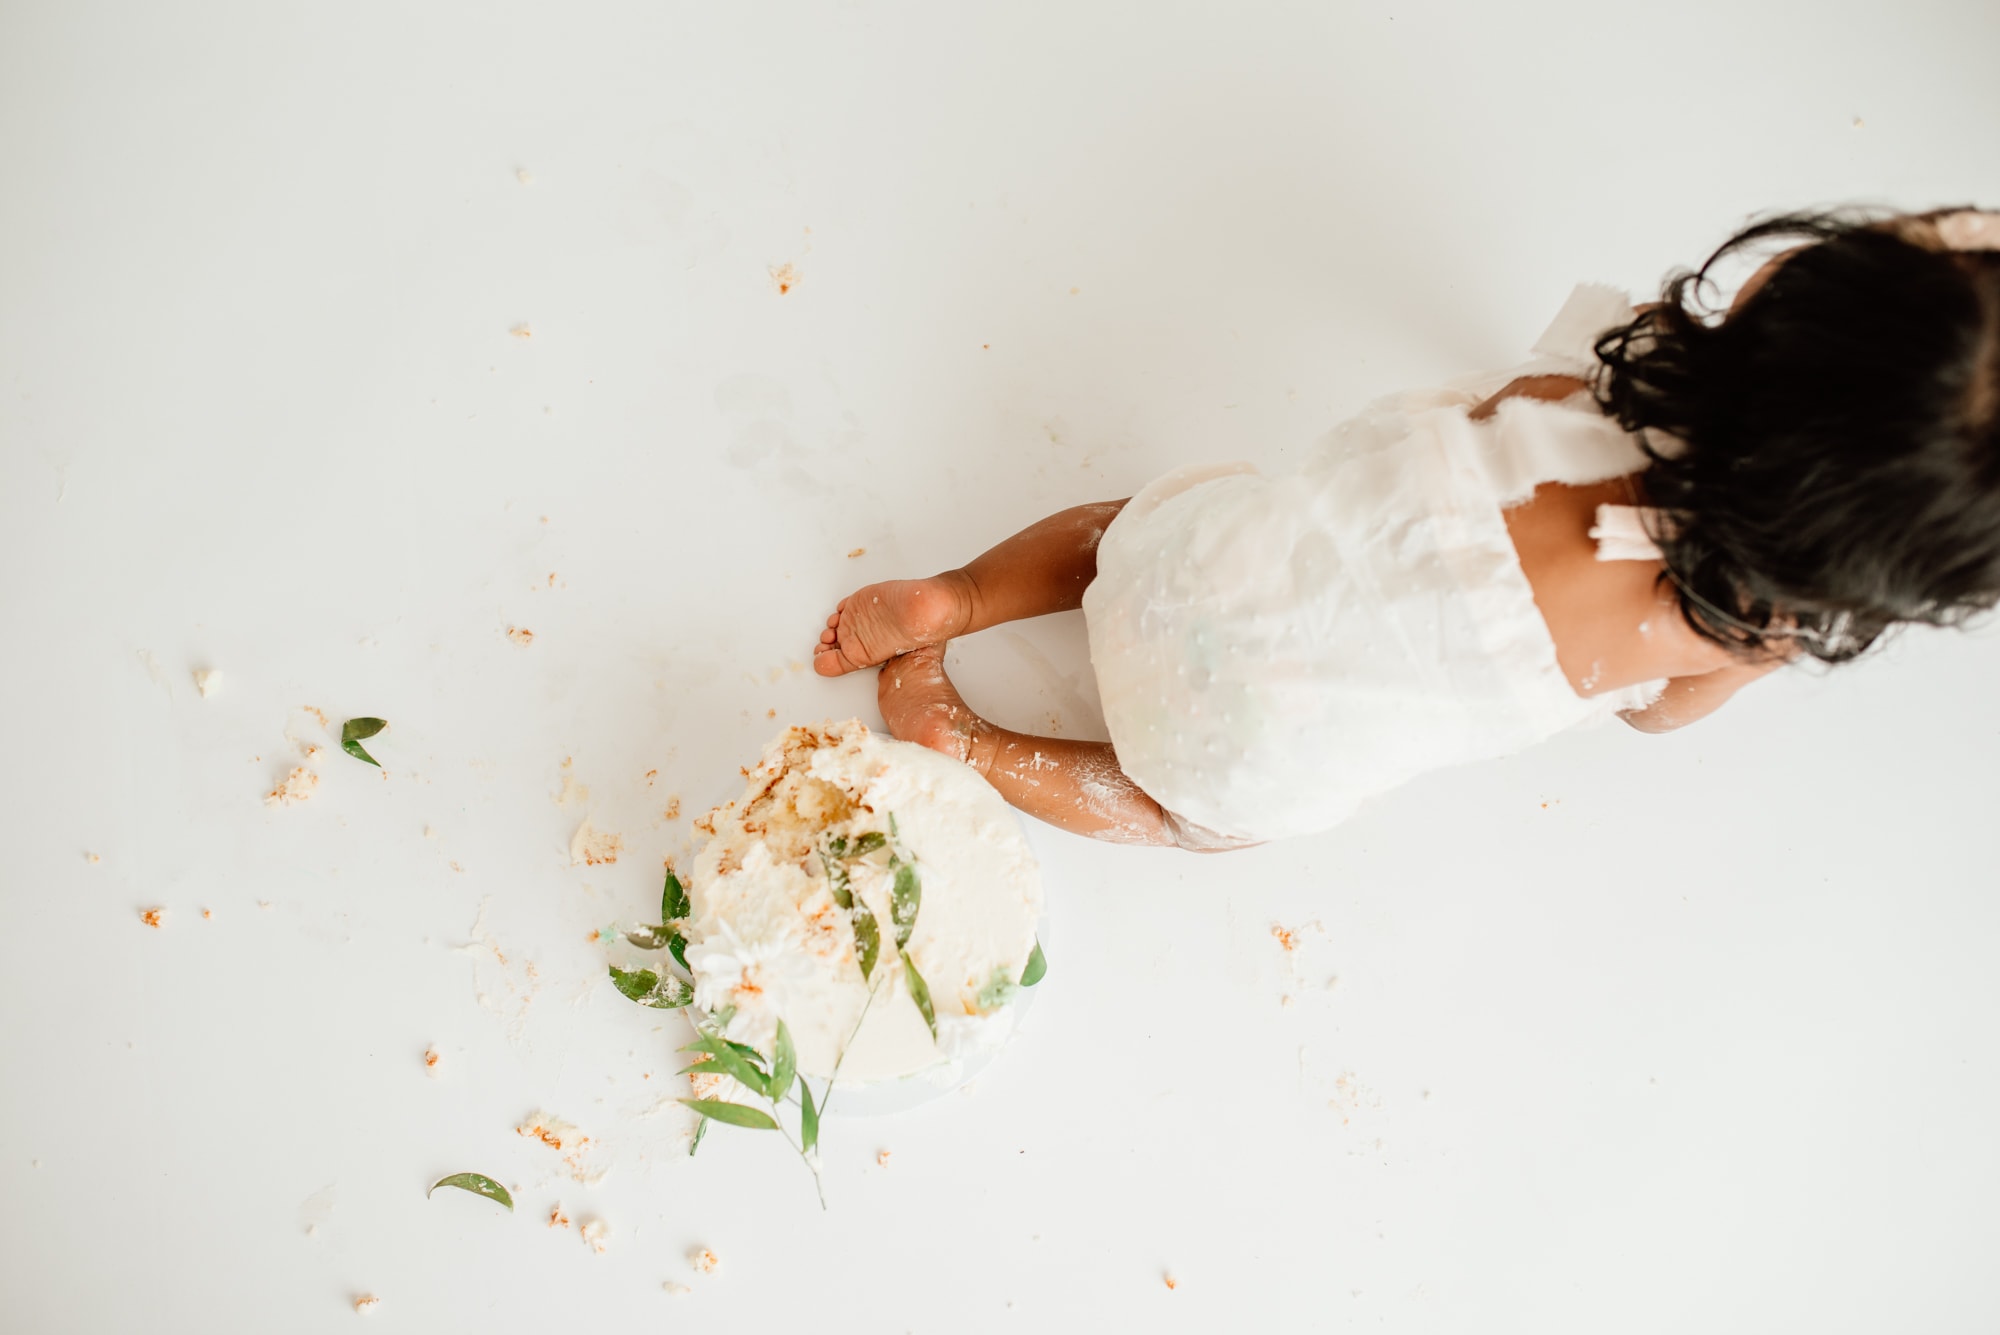 Baby in white romper crawls away from smashed cake in a white studio.